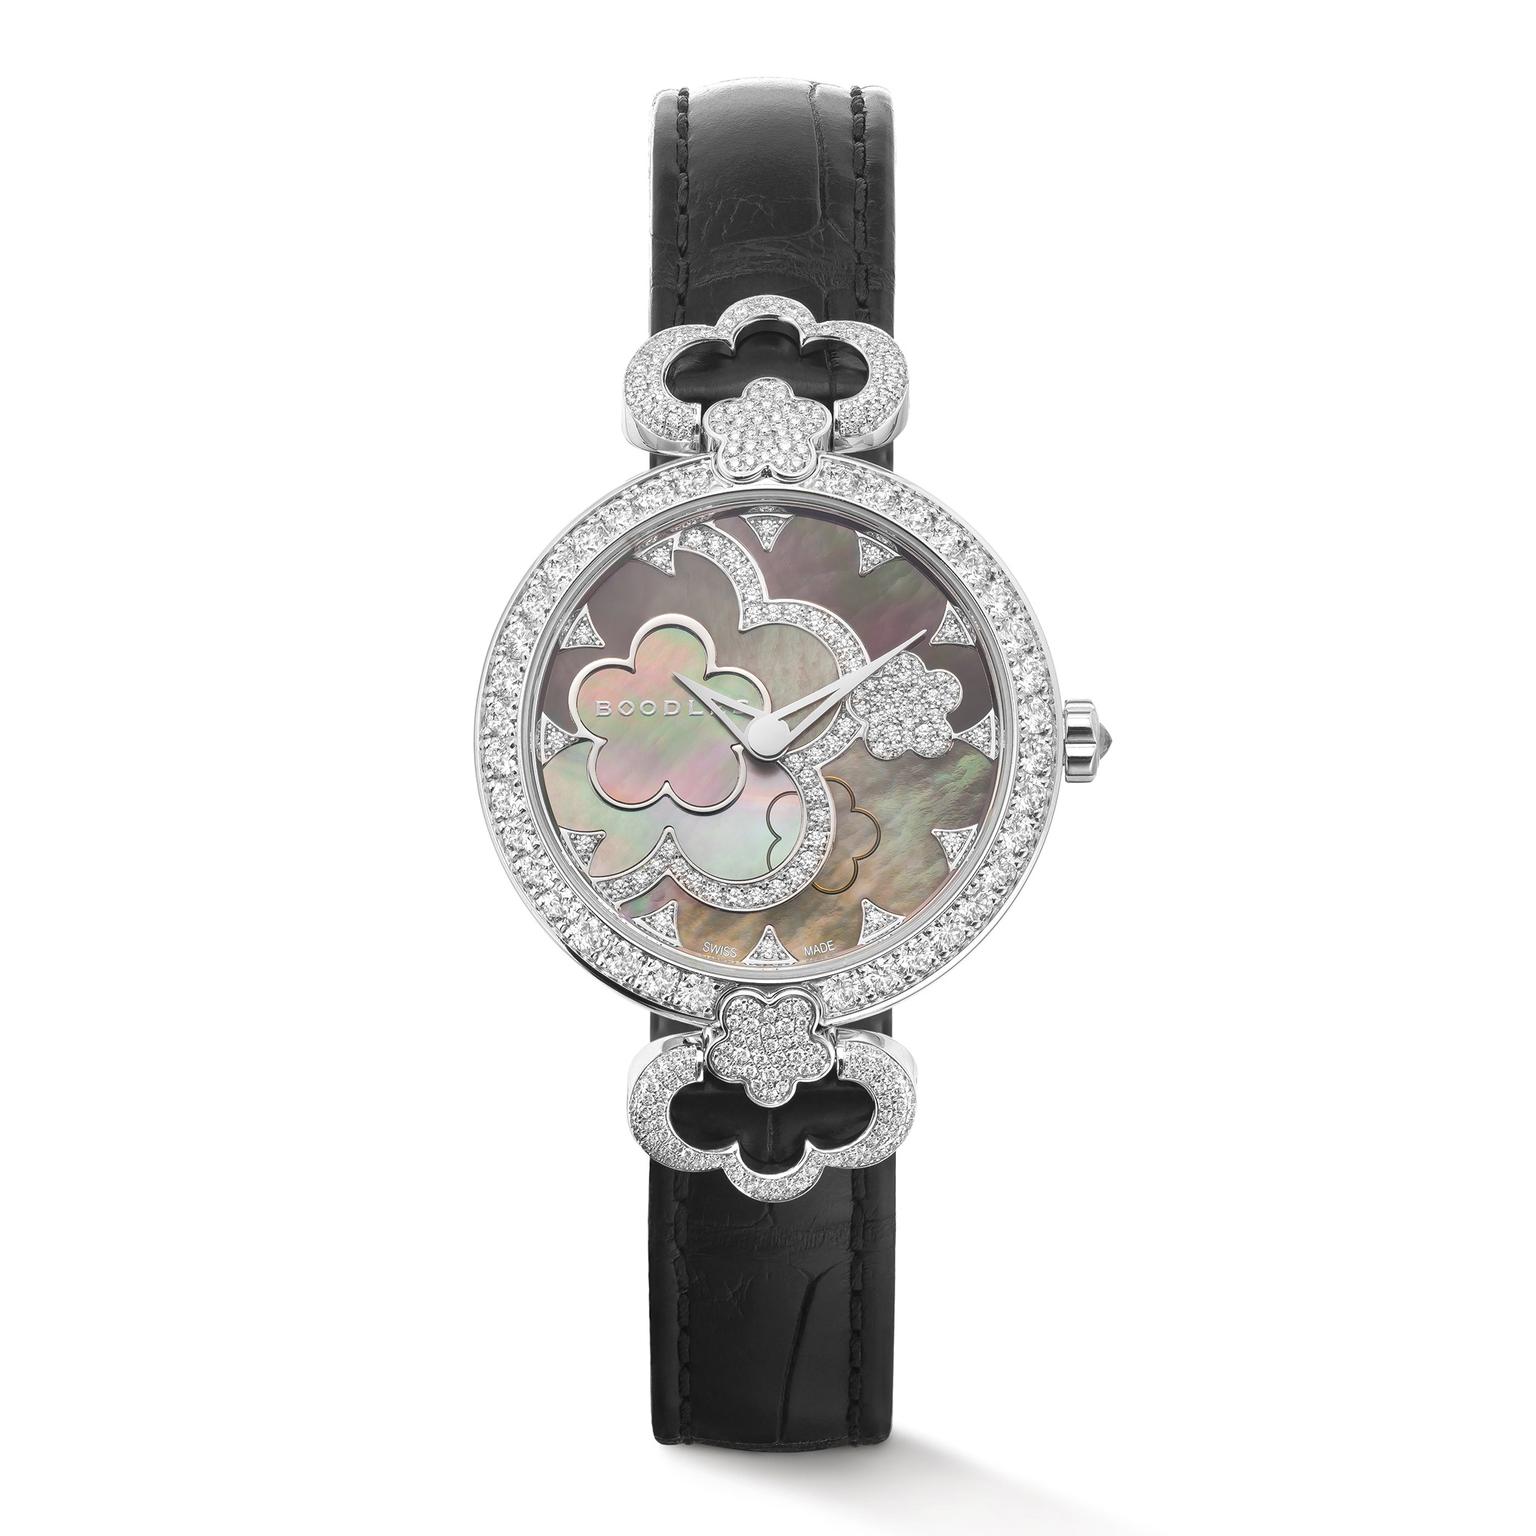 The new Boodles Blossom watch a precious as well as functional piece